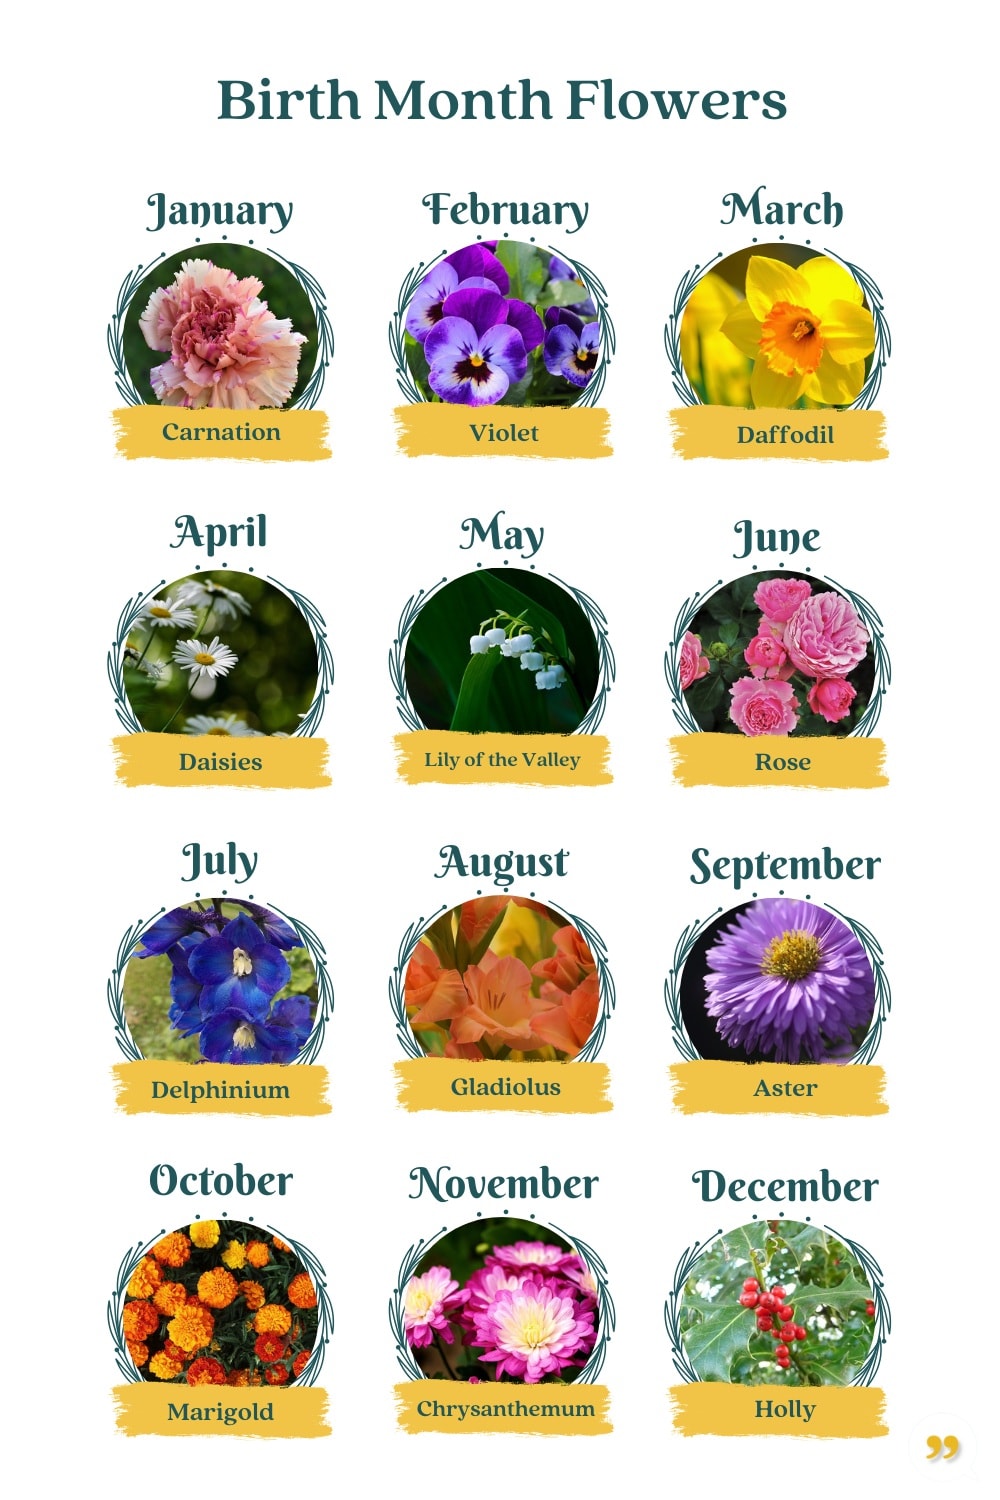 Flowers for every birth month